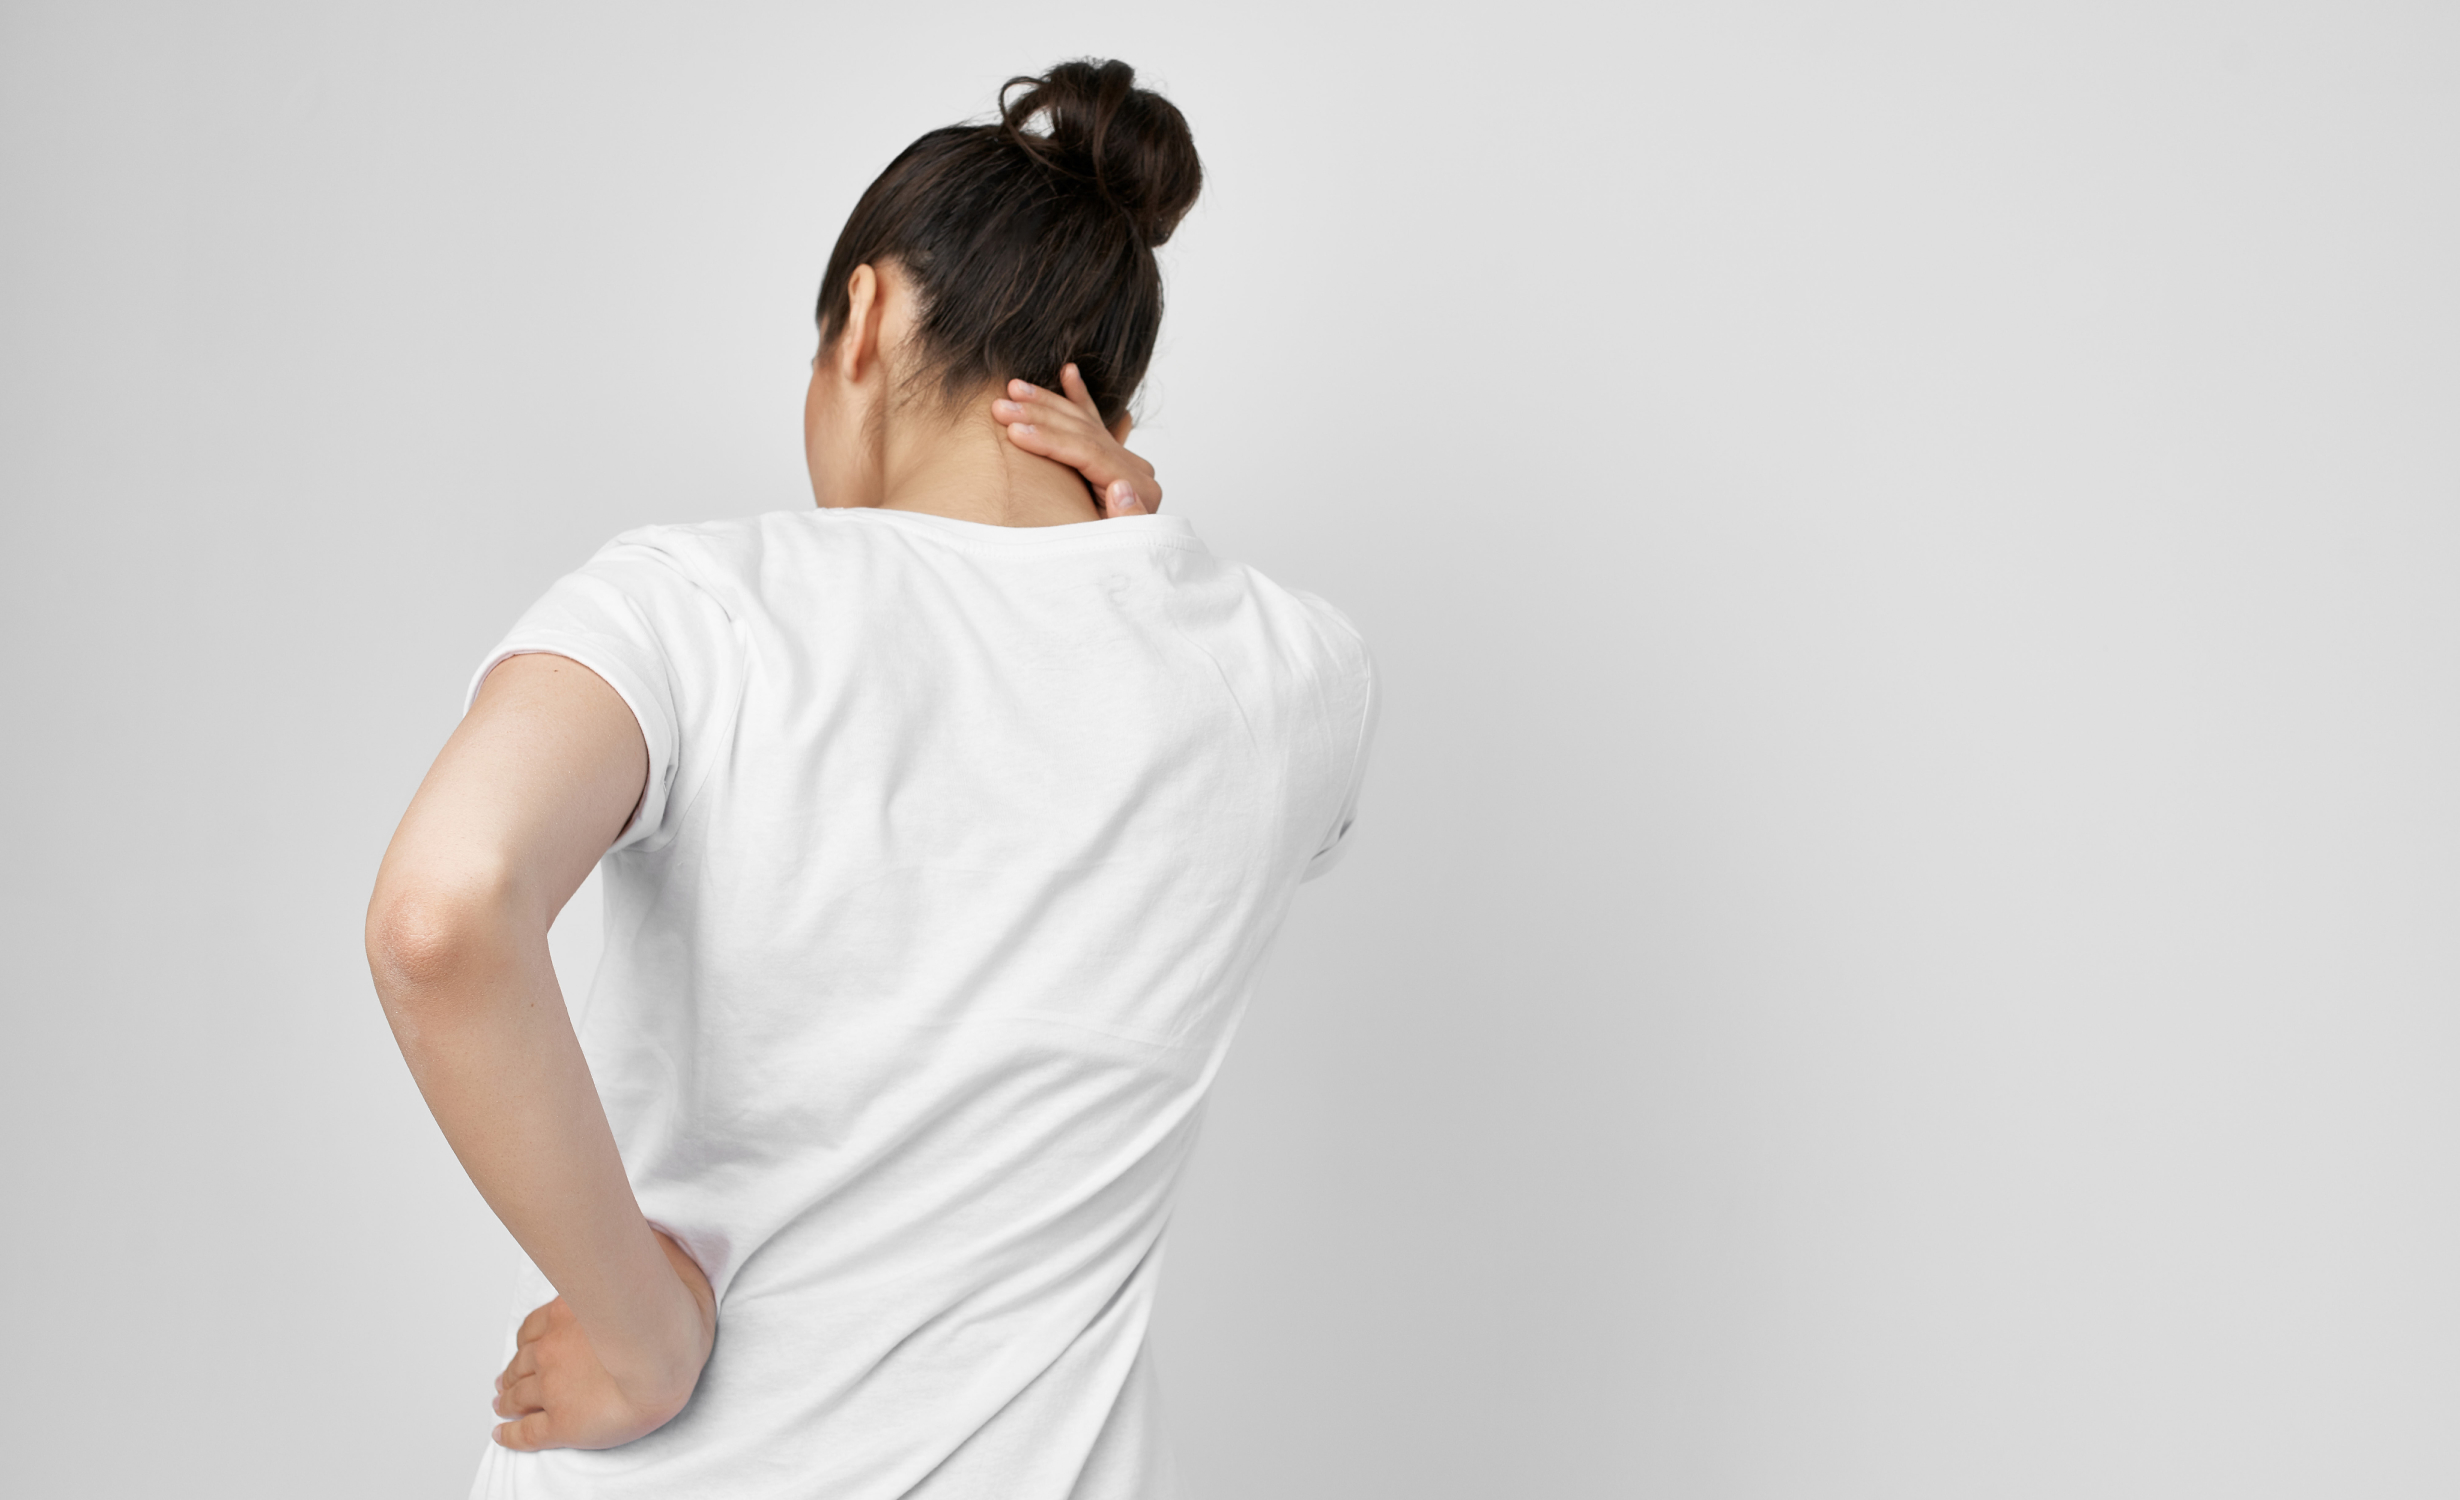 A woman in a white t-shirt seen from behind, holding her neck and lower back, indicating discomfort and body aches.